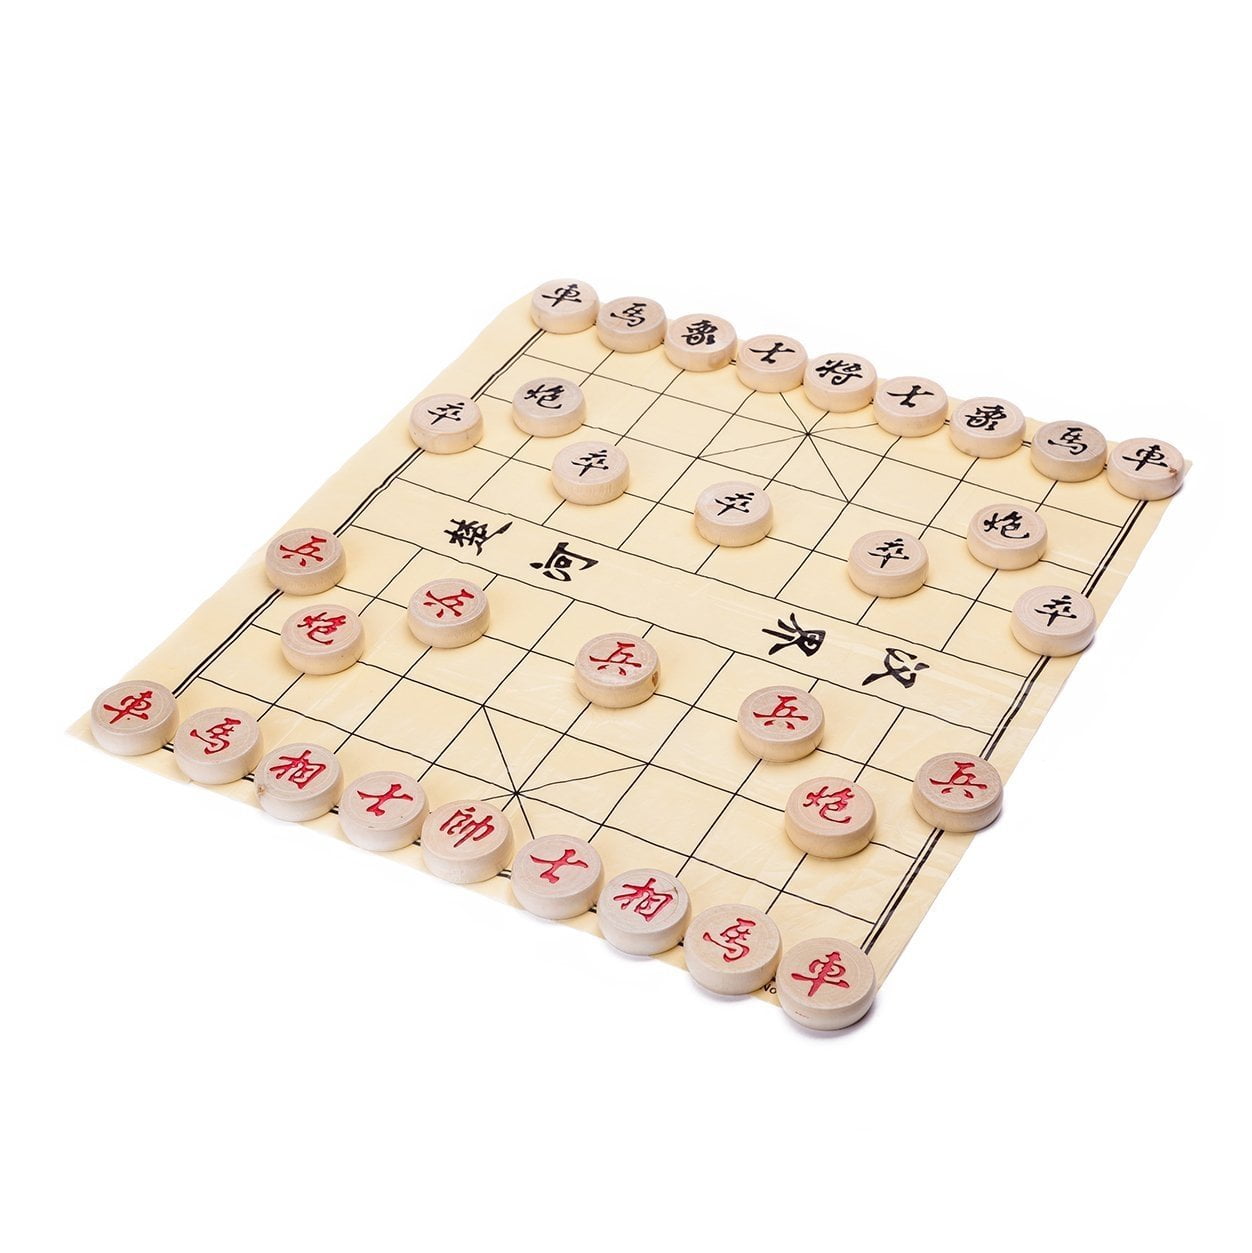 Wooden Chinese chess game with 32 chess pieces Xiangqi set 